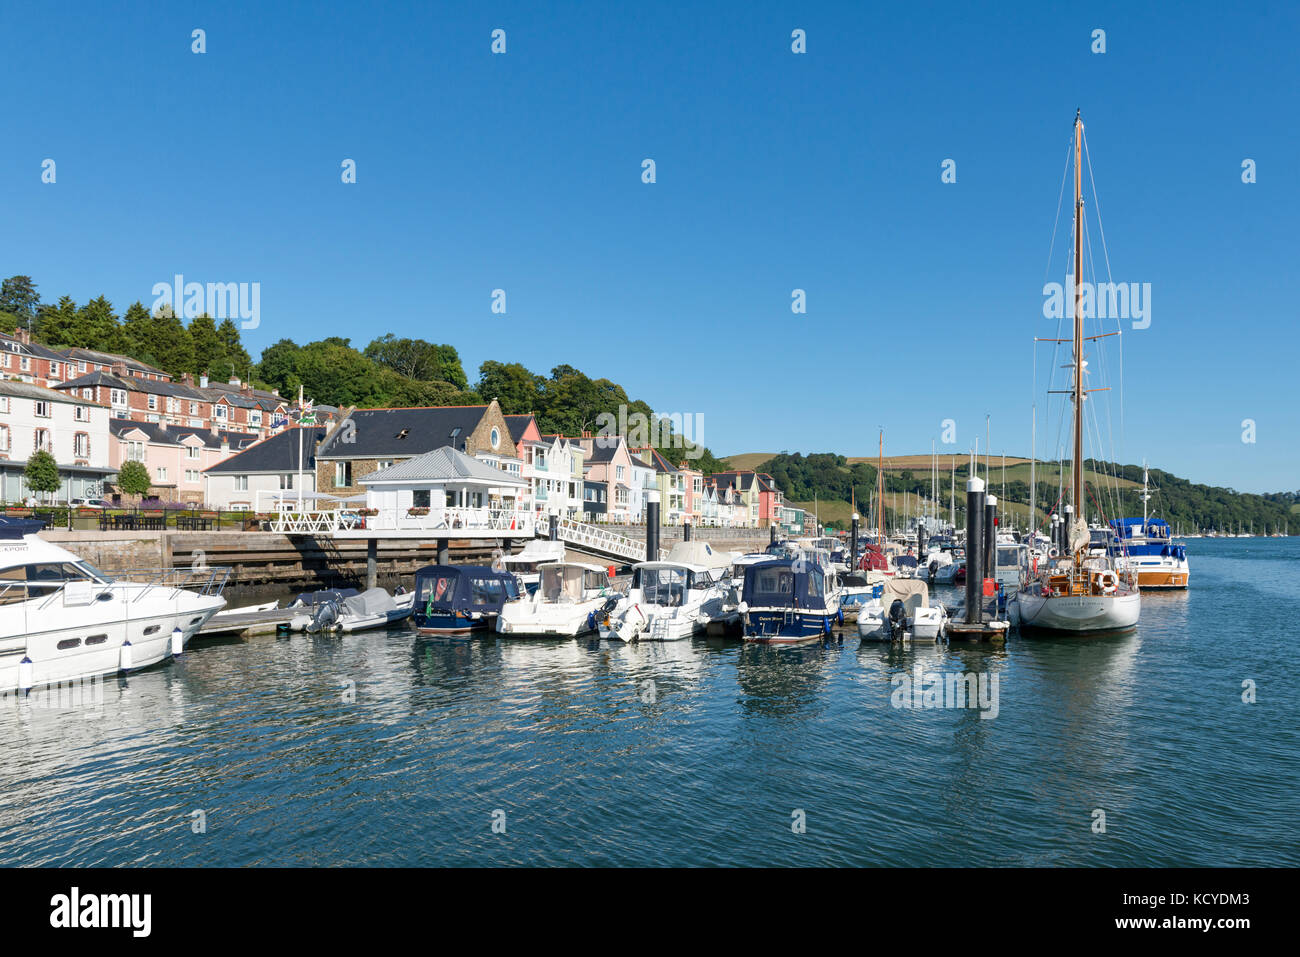 From the River Dart, Dartmouth, Devon - Dart Marina and Hotel with yachts and pleasure craft on water, hotel and buildings, trees and hills. Summer Stock Photo